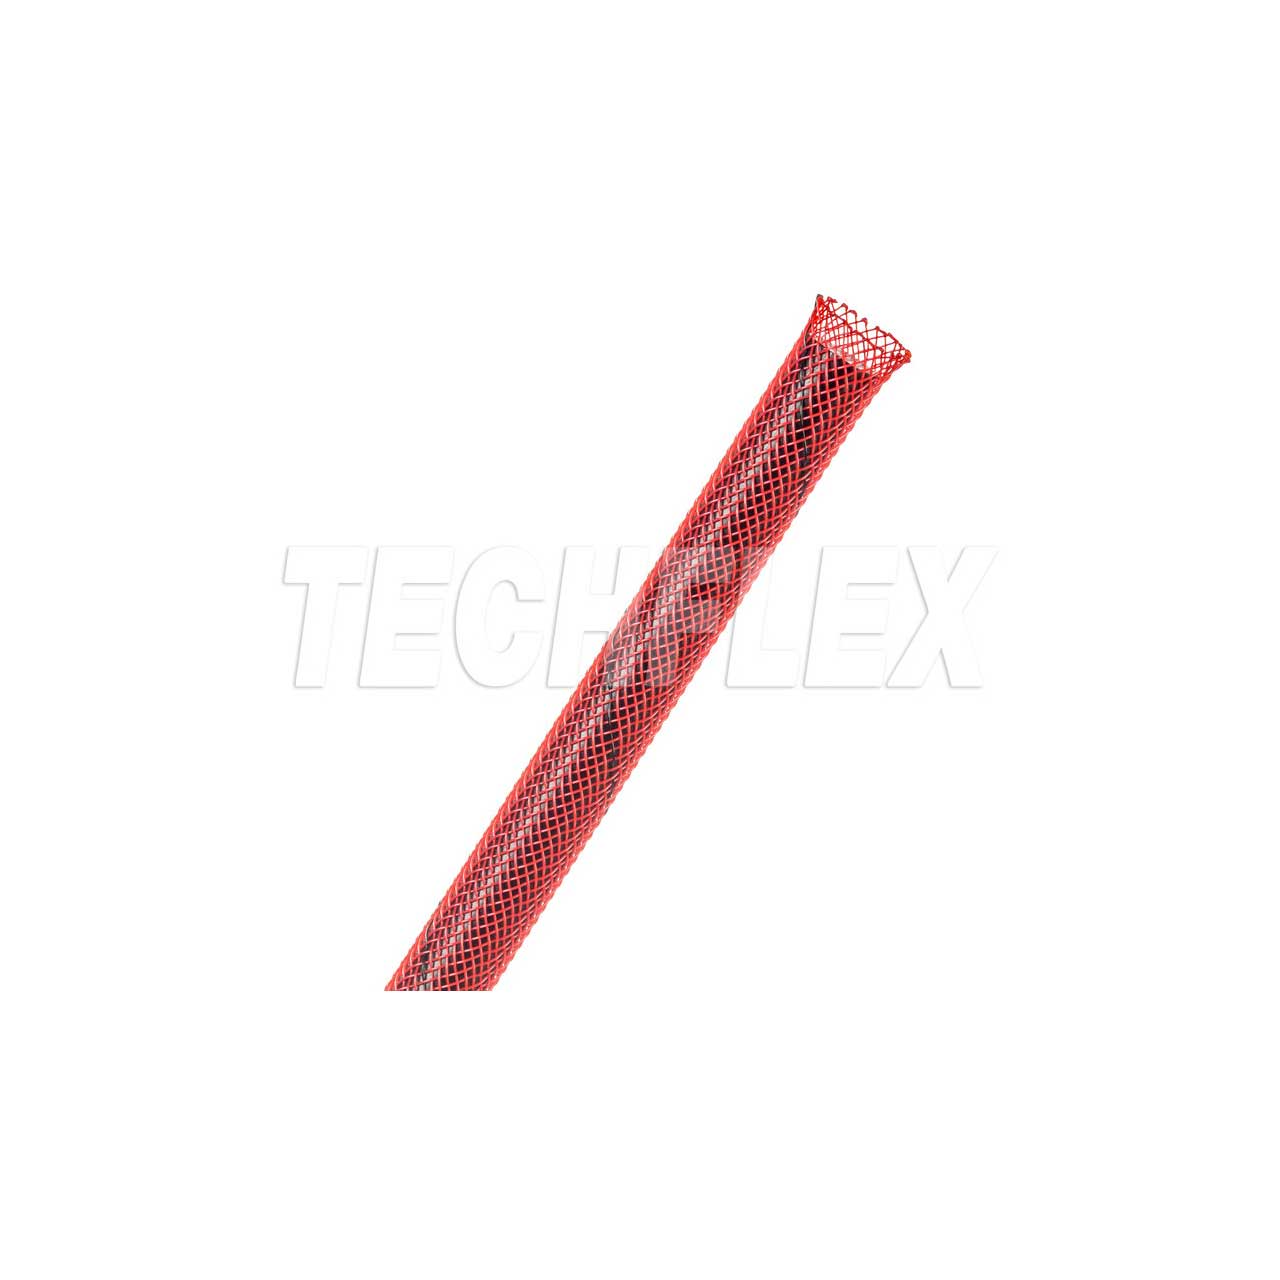 Techflex PTN0.25RU Flexo PET - 1/4 Inch Red with Black Tracer Cable Sleeve - 1000 Foot  PTN0.25RU